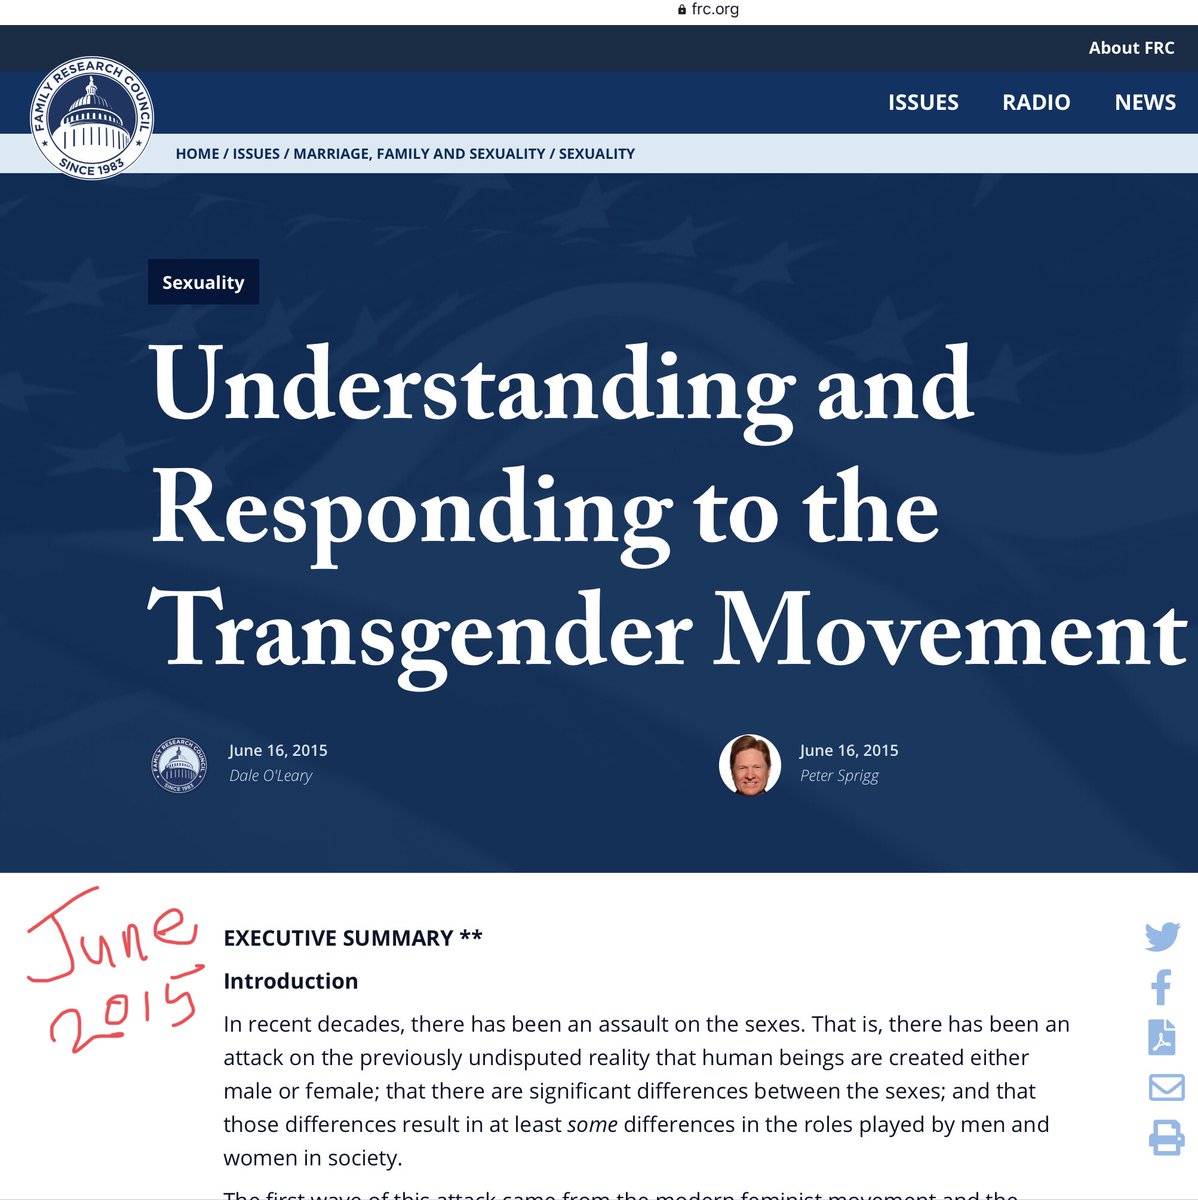 So let’s look at what FRC was saying about the transgender issue before, to our knowledge, anyone there had exchanged even an email with a radical feminist. From 2015, this is their report, “Understanding and Responding to the Transgender Movement.” https://www.frc.org/transgender 